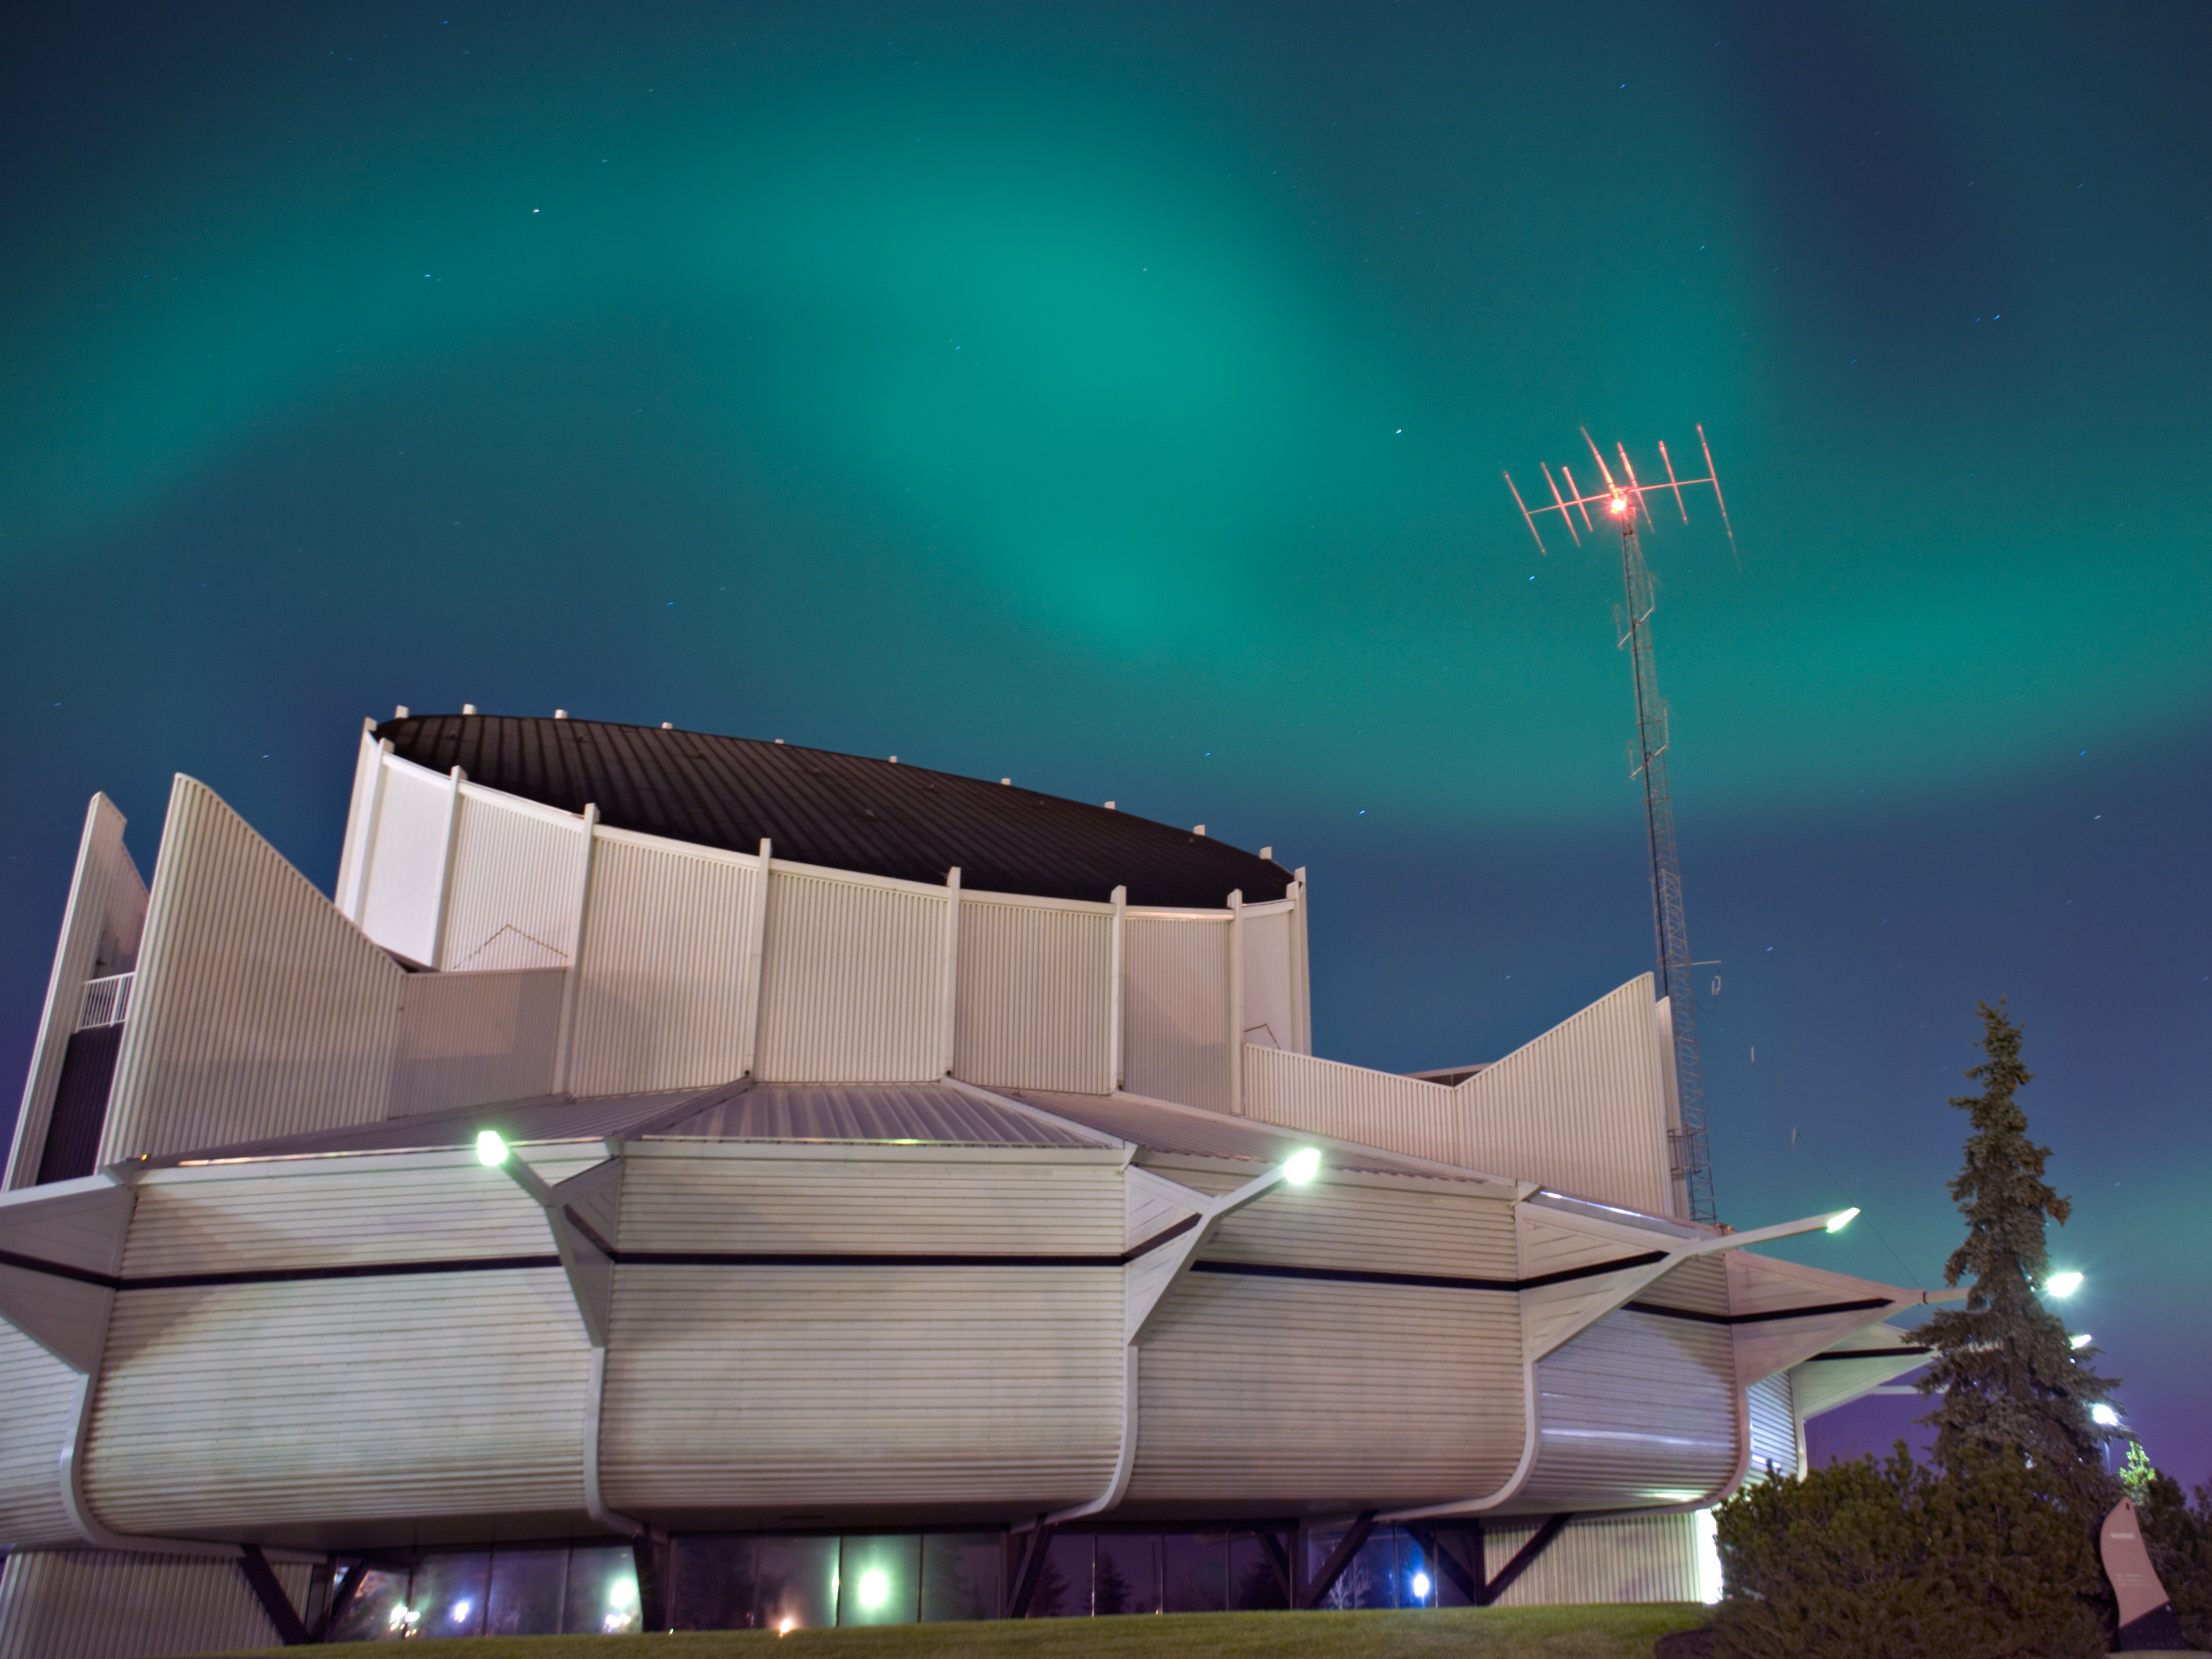 Northern Lights over the University of Alberta’s observatory